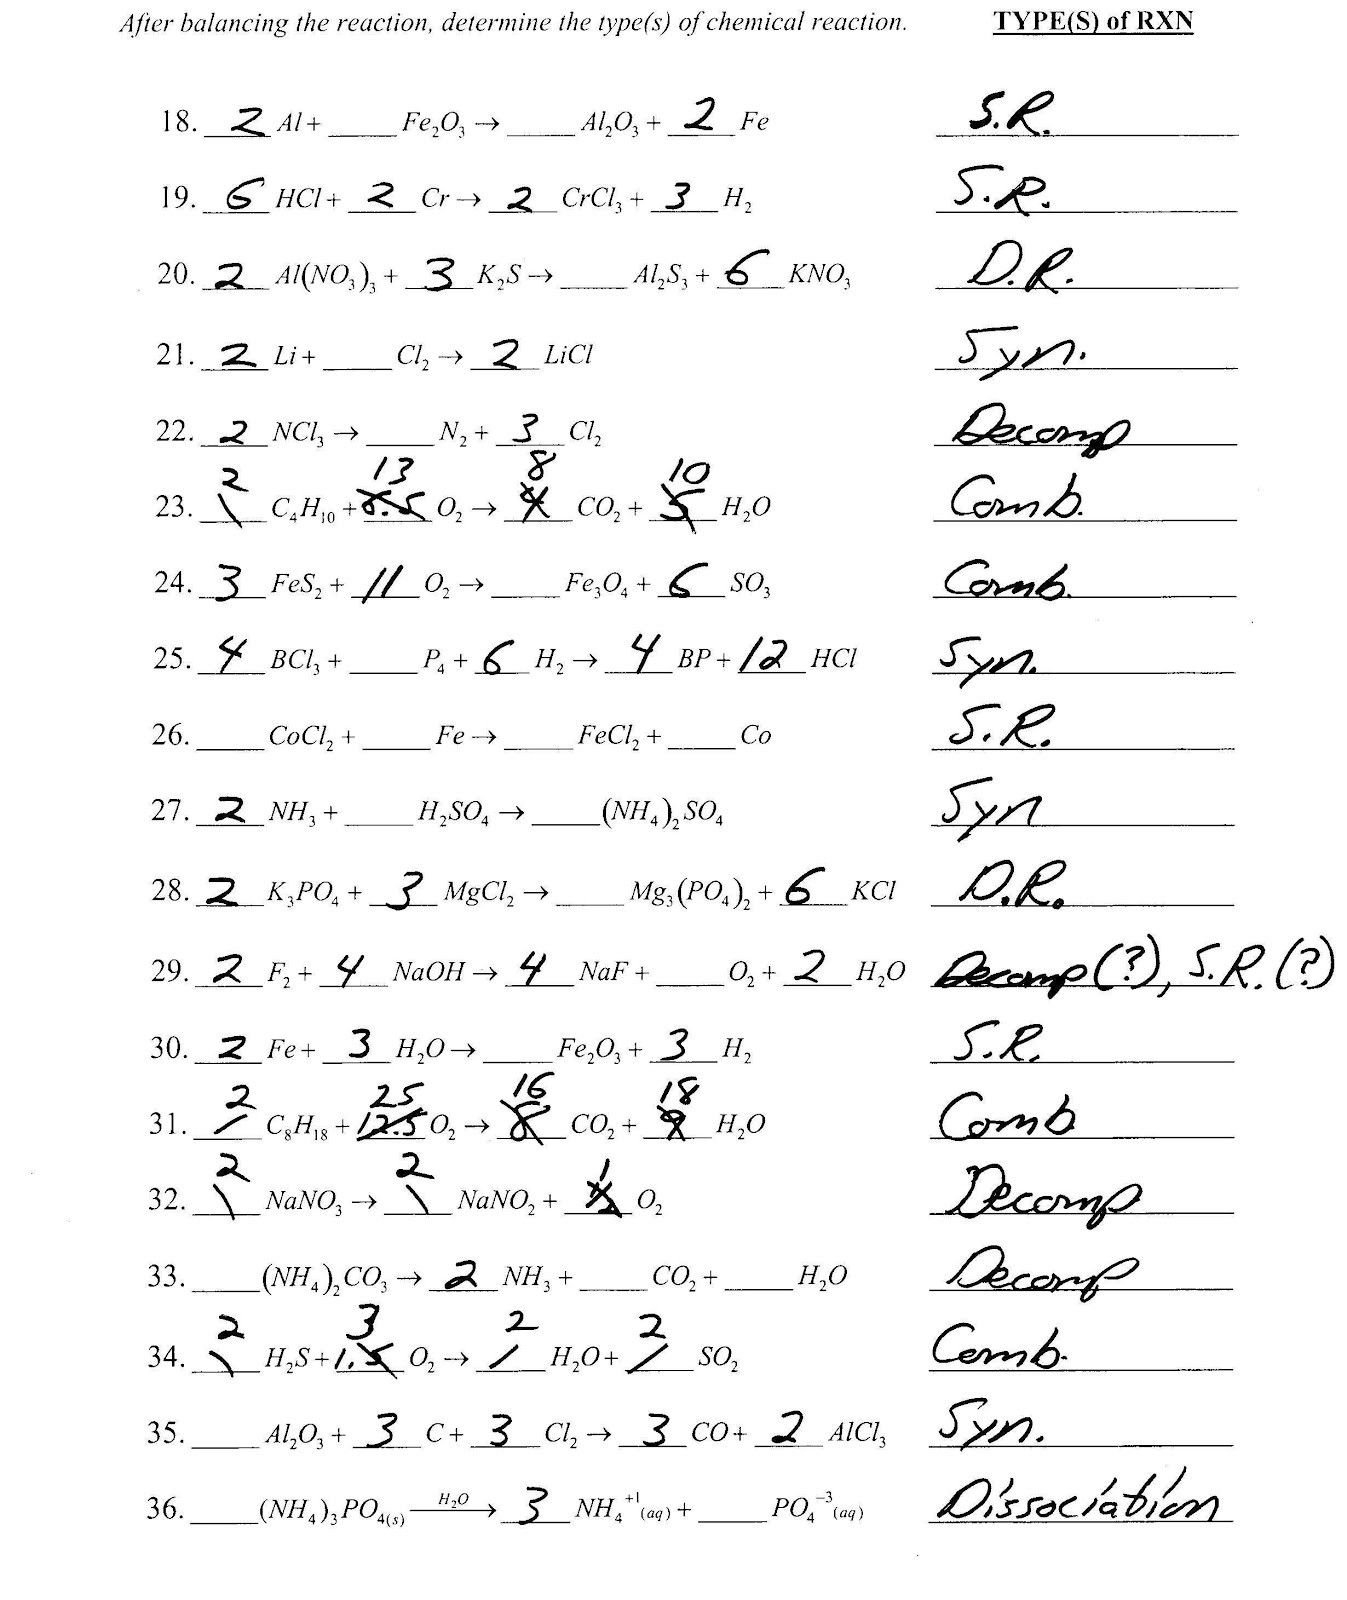 Worksheet 3 Balancing Equations And Identifying Types Of Reactions Together With Balancing Chemical Equations Worksheet 2 Classifying Chemical Reactions Answers